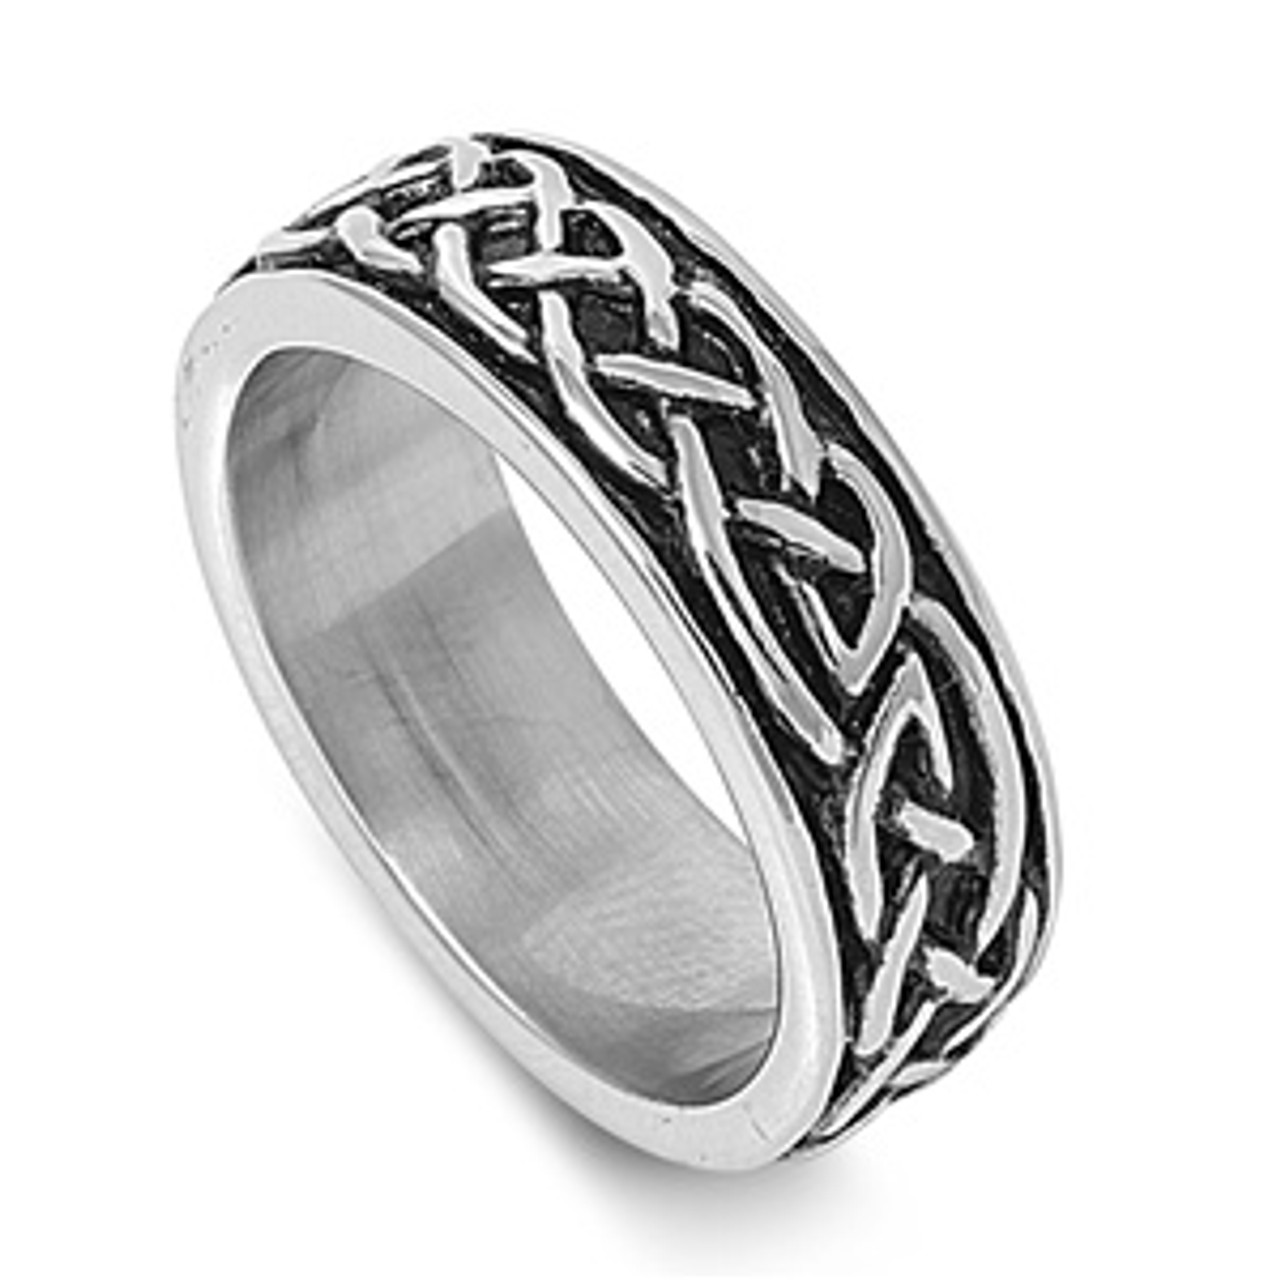 Stainless Steel Infinity Design Ring Personalized Gift Item